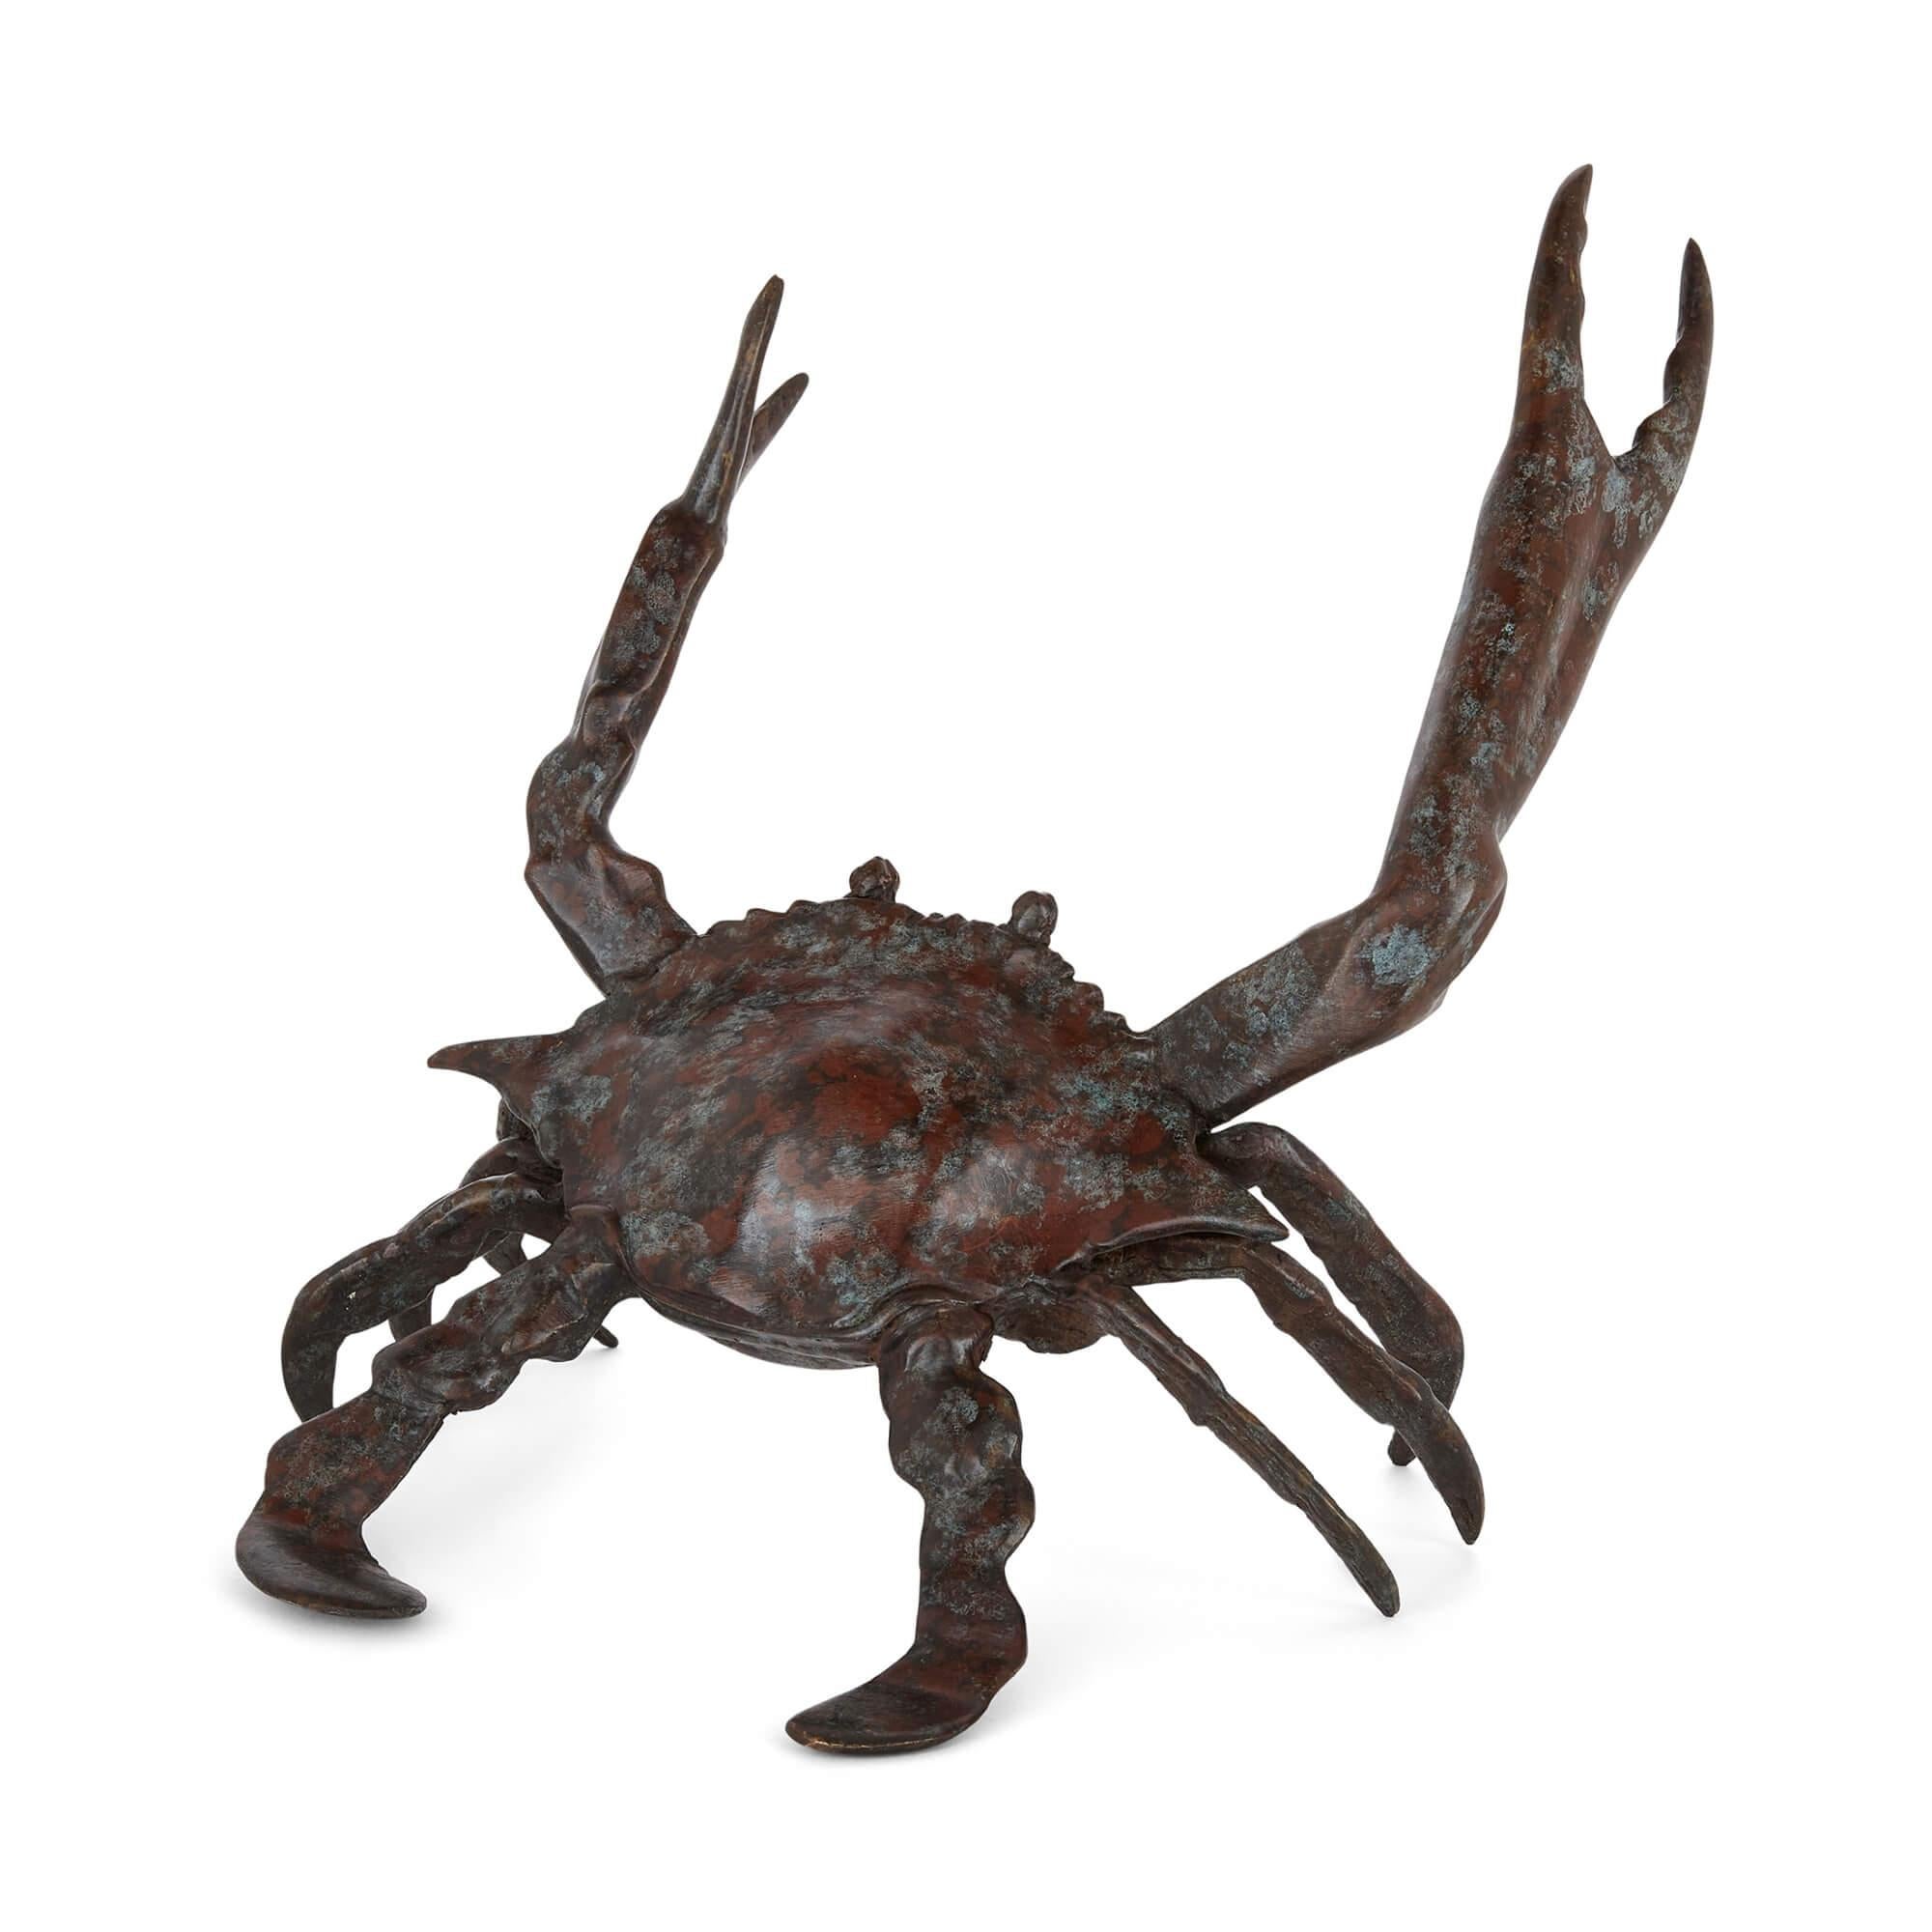 Decorative patinated bronze model of a crab 
Continental, Early 20th Century  
Height 22cm, width 32cm, depth 22cm 

This large crustacean model is a beautifully made early 20th century piece, wrought from patinated bronze to depict an animated